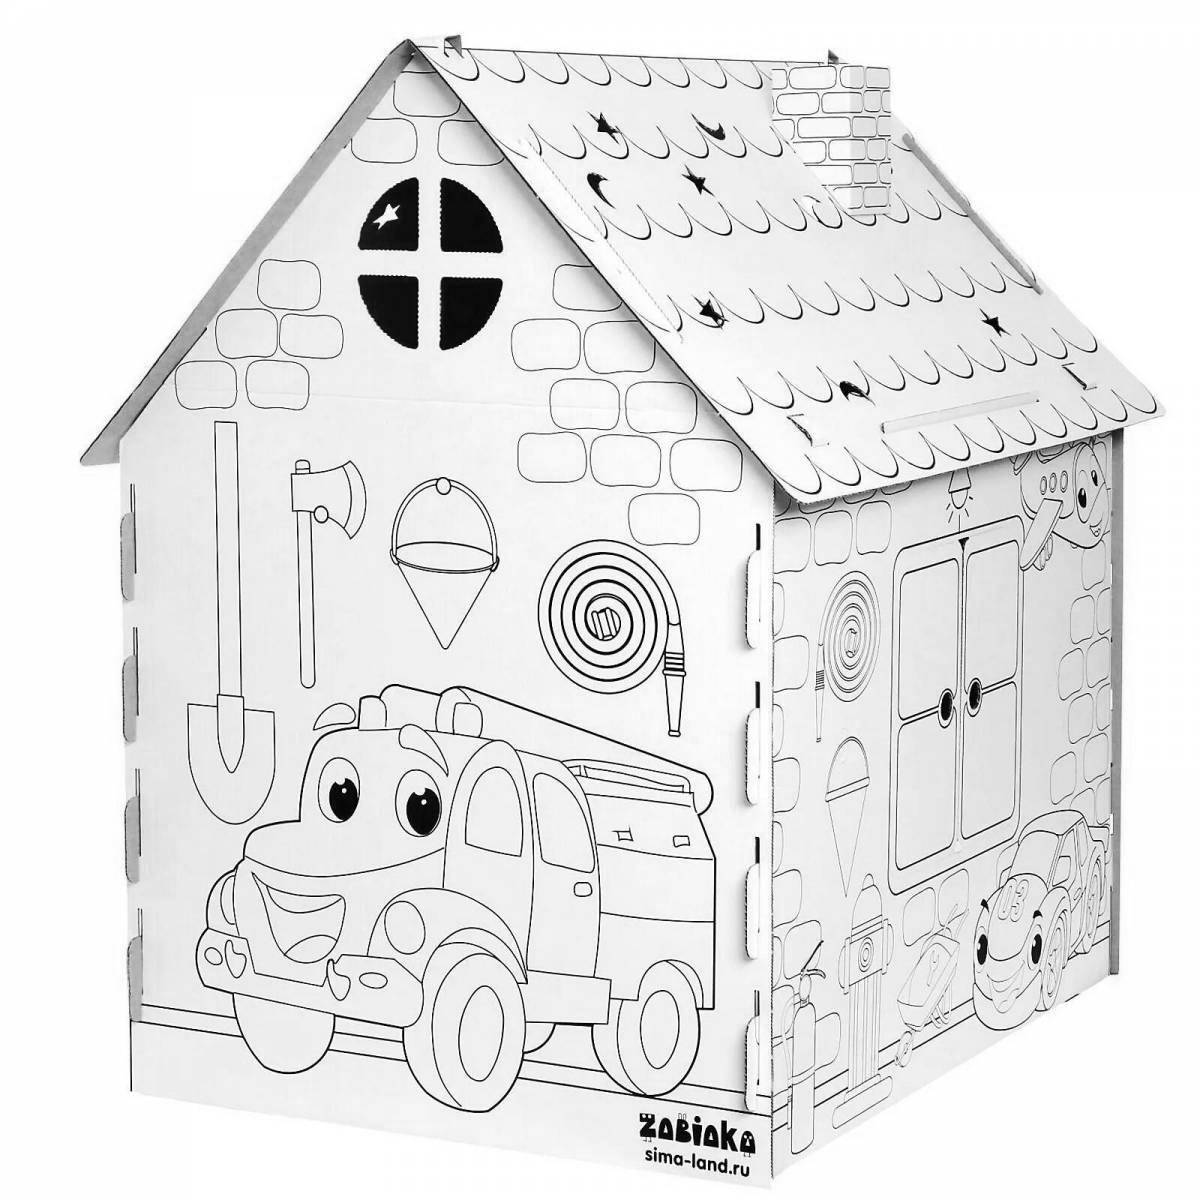 Price of cardboard house coloring page